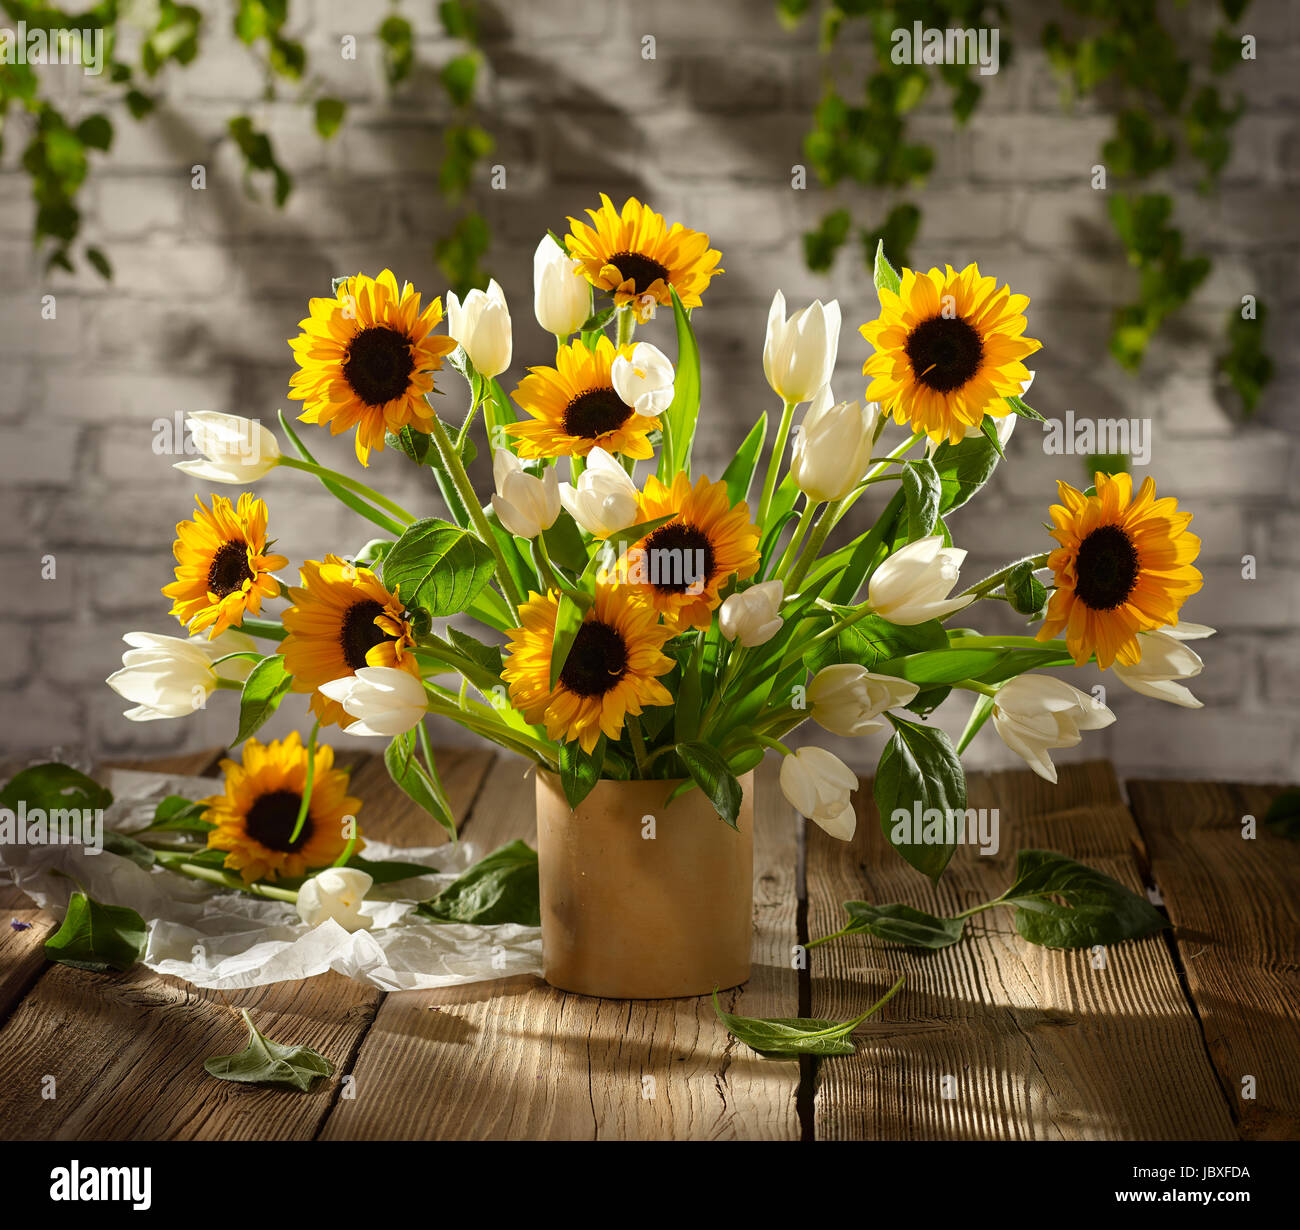 Bouquet of flowers with sunflowers and tulips. Stock Photo